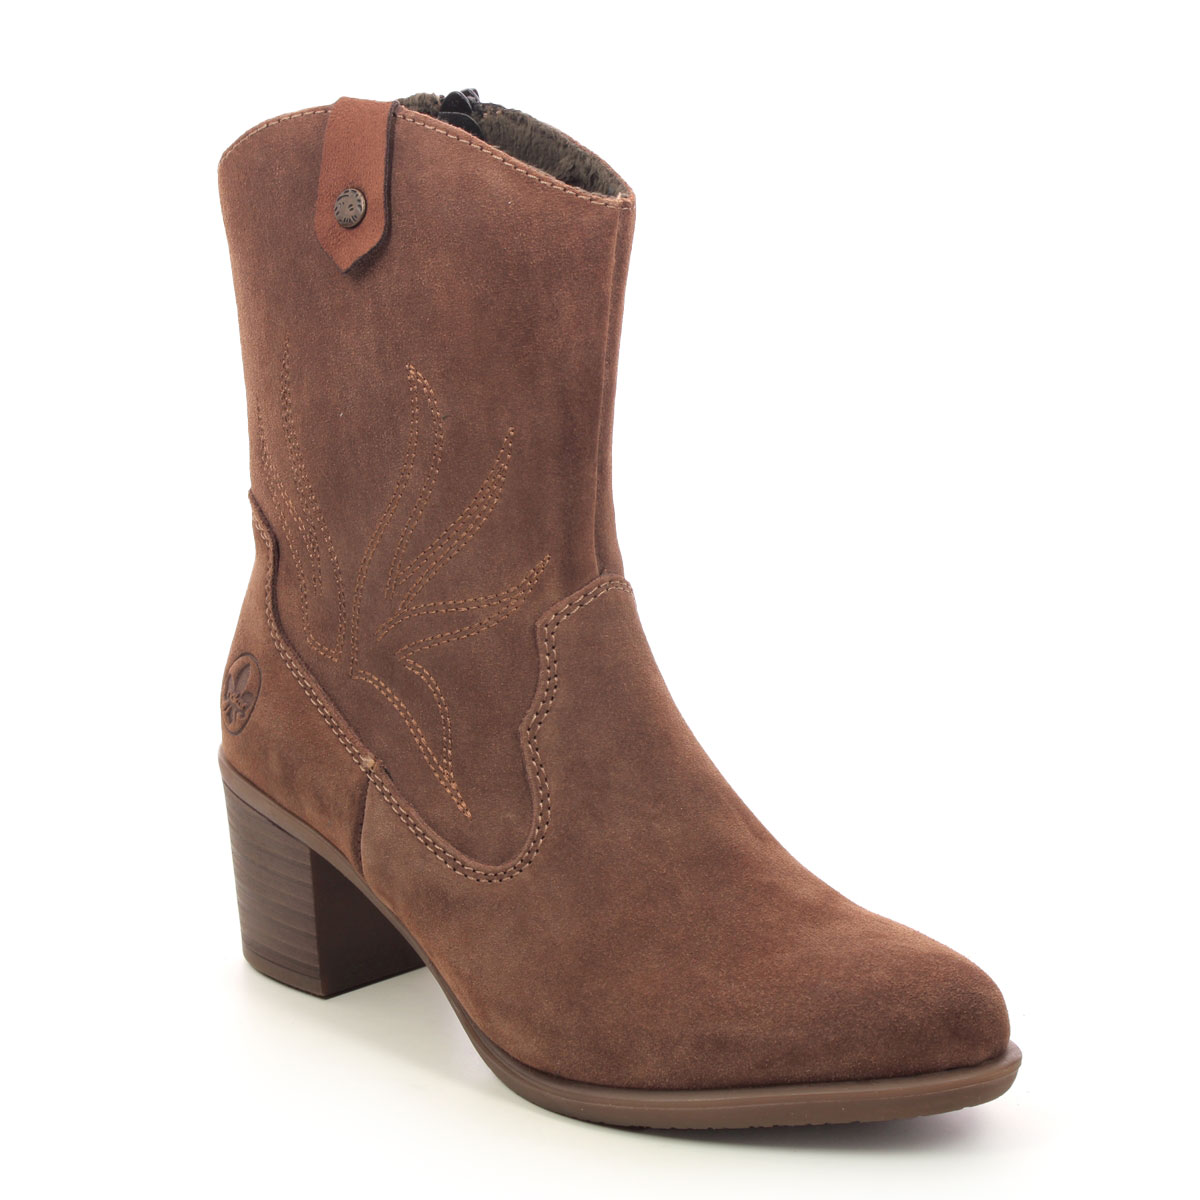 Rieker Saddle West Tan Suede Womens Ankle Boots Y2057-20 In Size 41 In Plain Tan Suede